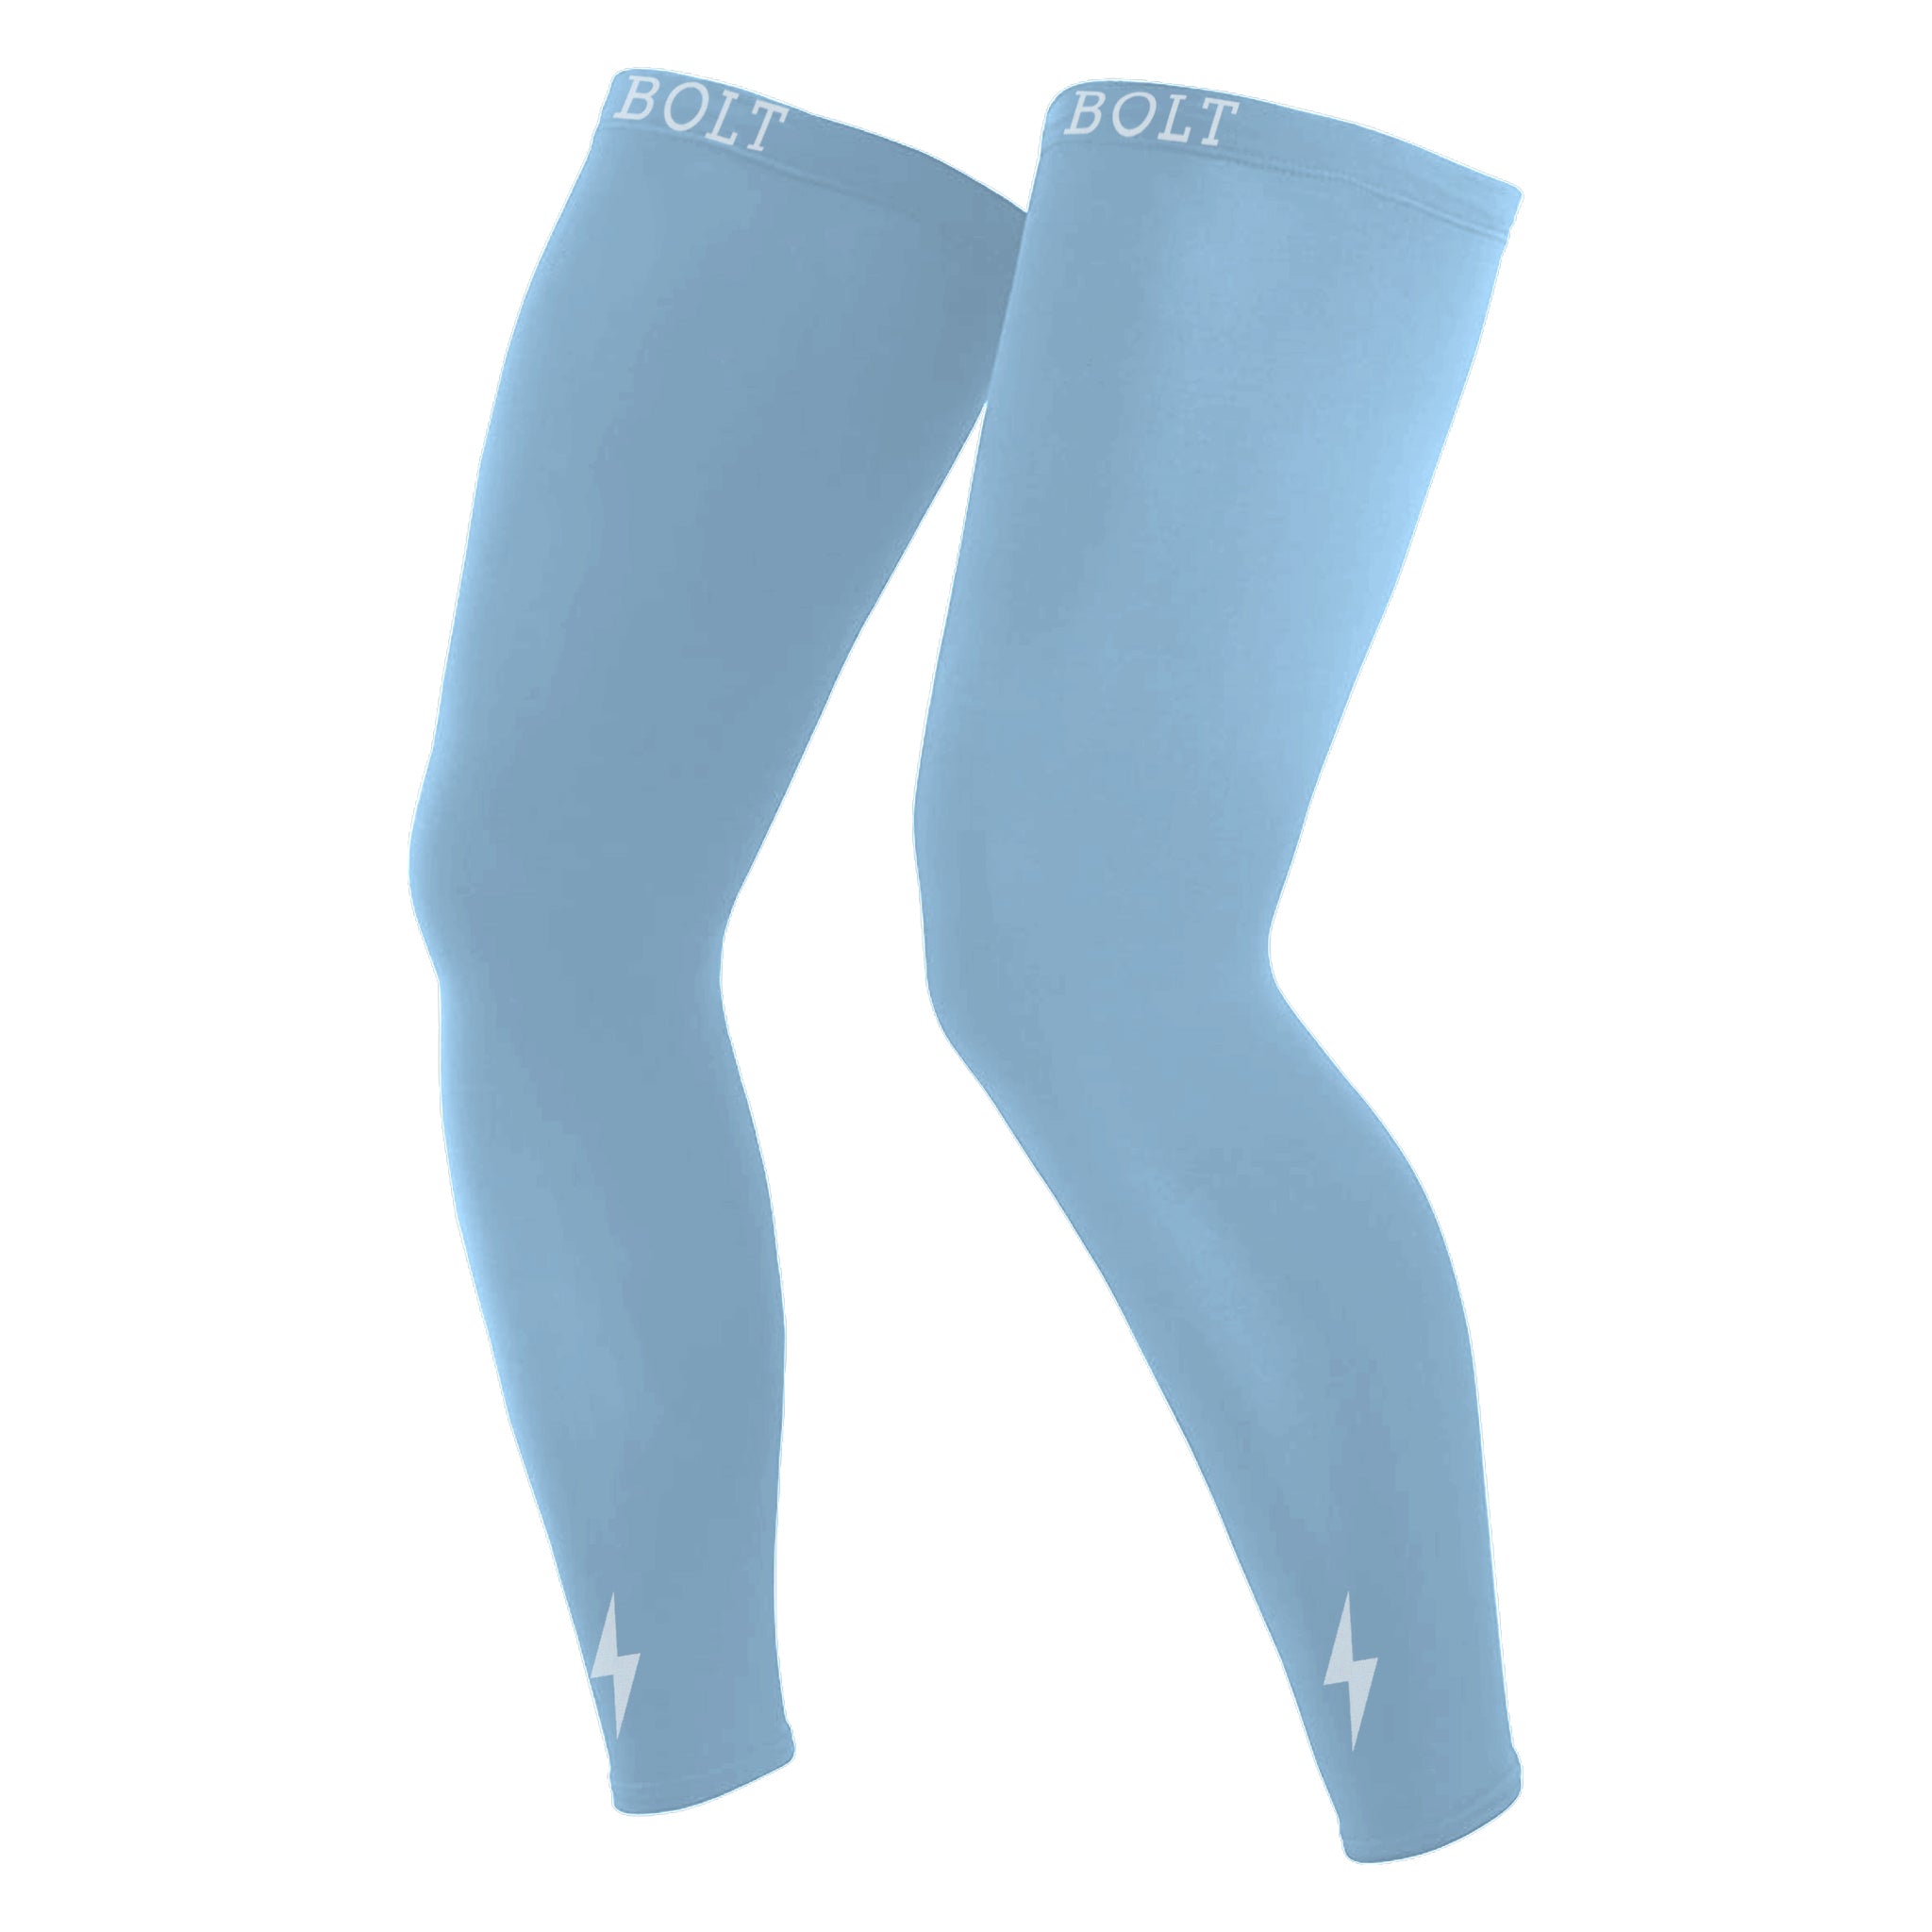 Image of BRUCE BOLT Xtra Long Compression Leg Sleeves (pair) - BABY BLUE